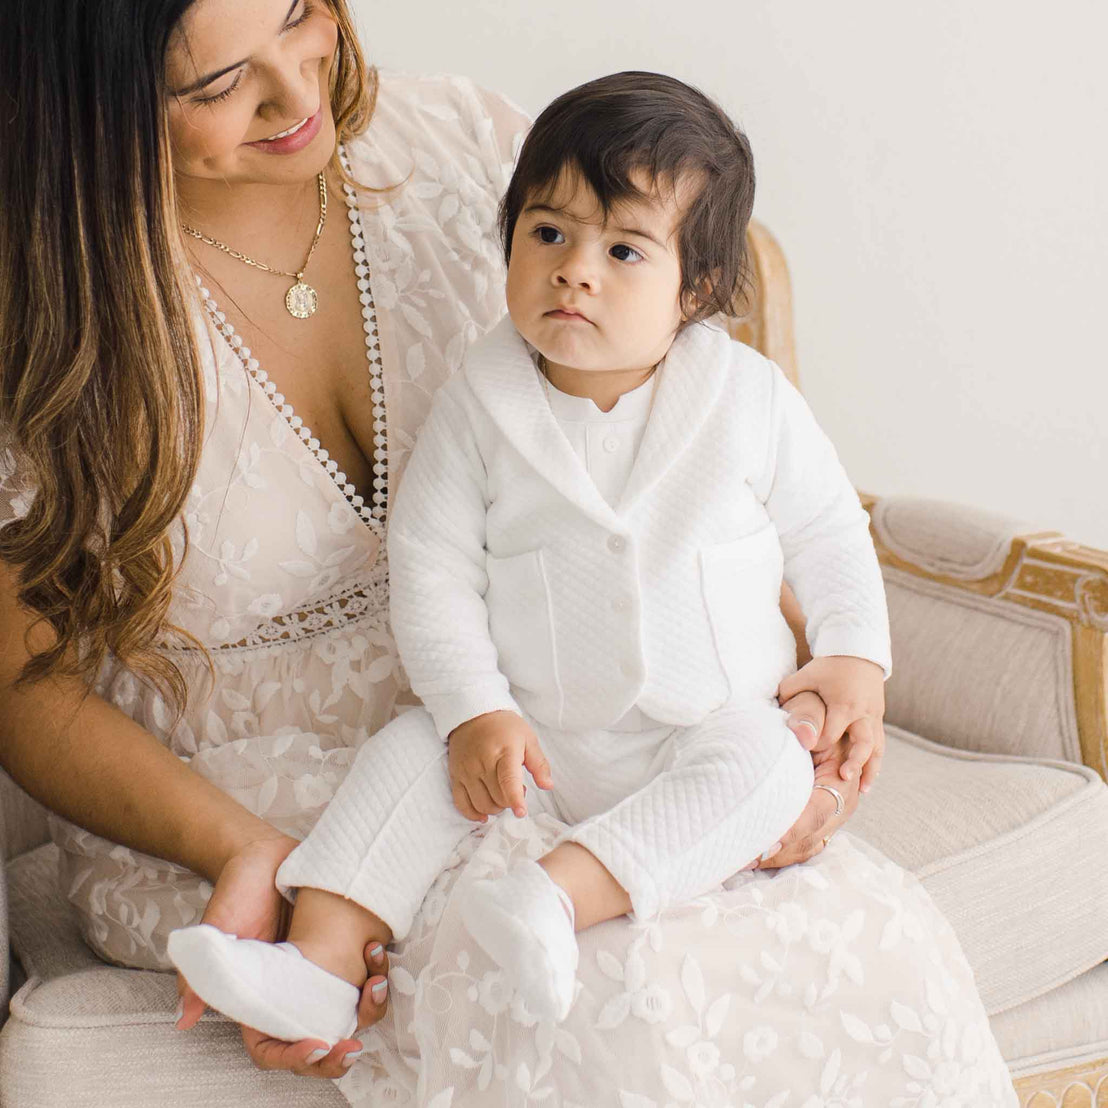 Baby boy sitting on his mother's lap and wearing the Elijah 3-Piece Suit made from 100% white textured cotton jacket and pants, and a white cotton / rayon blend shirt